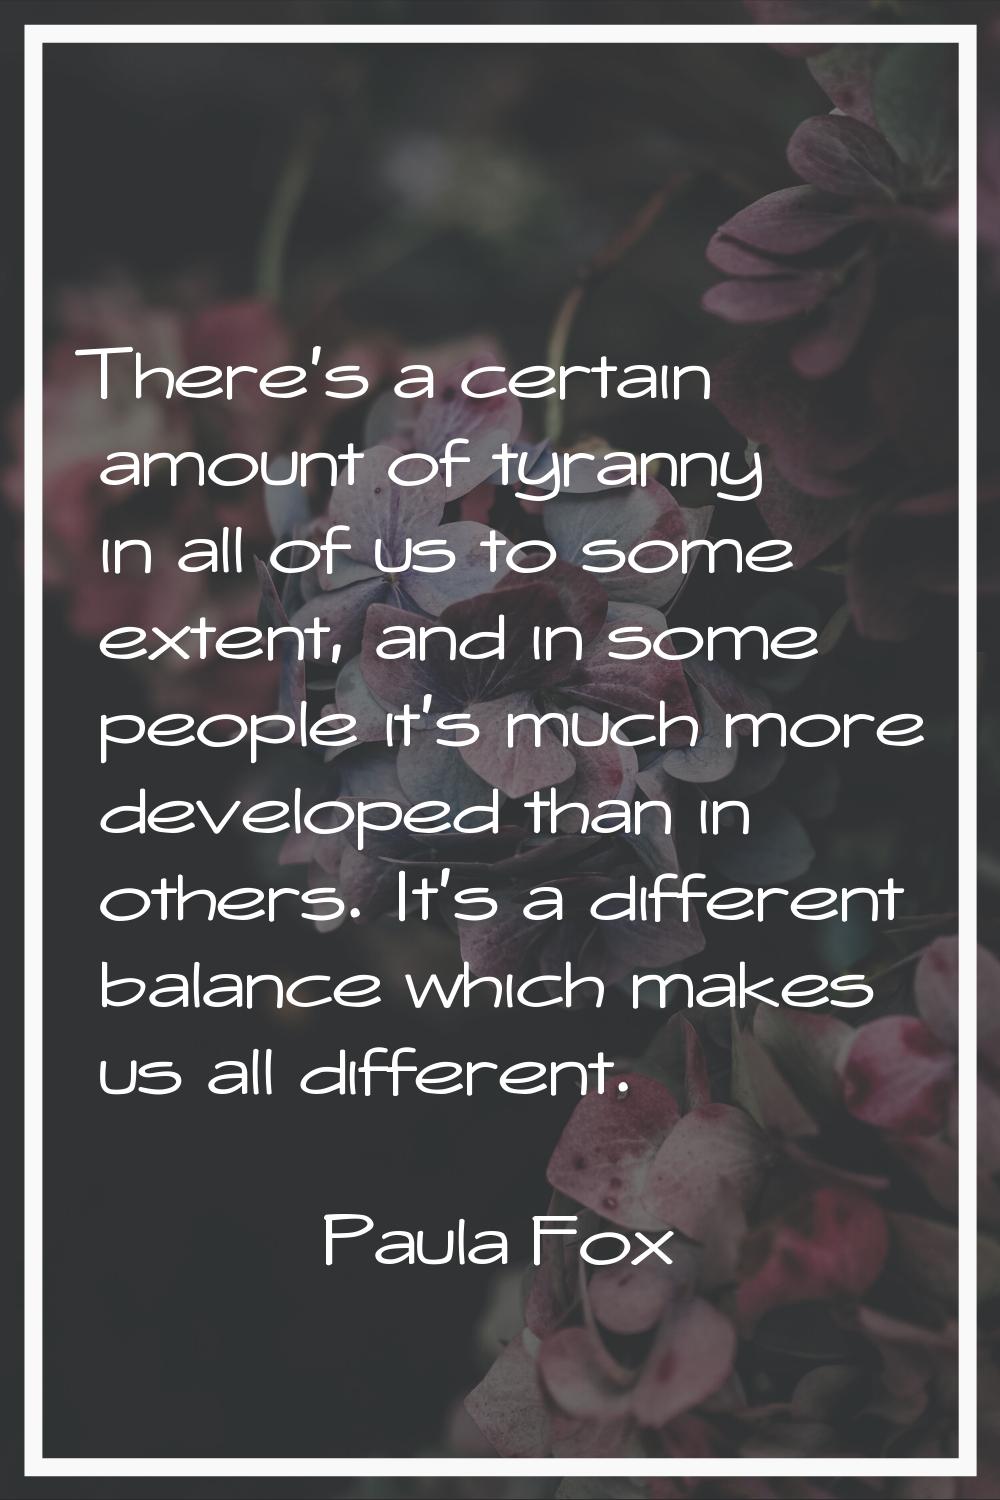 There's a certain amount of tyranny in all of us to some extent, and in some people it's much more 